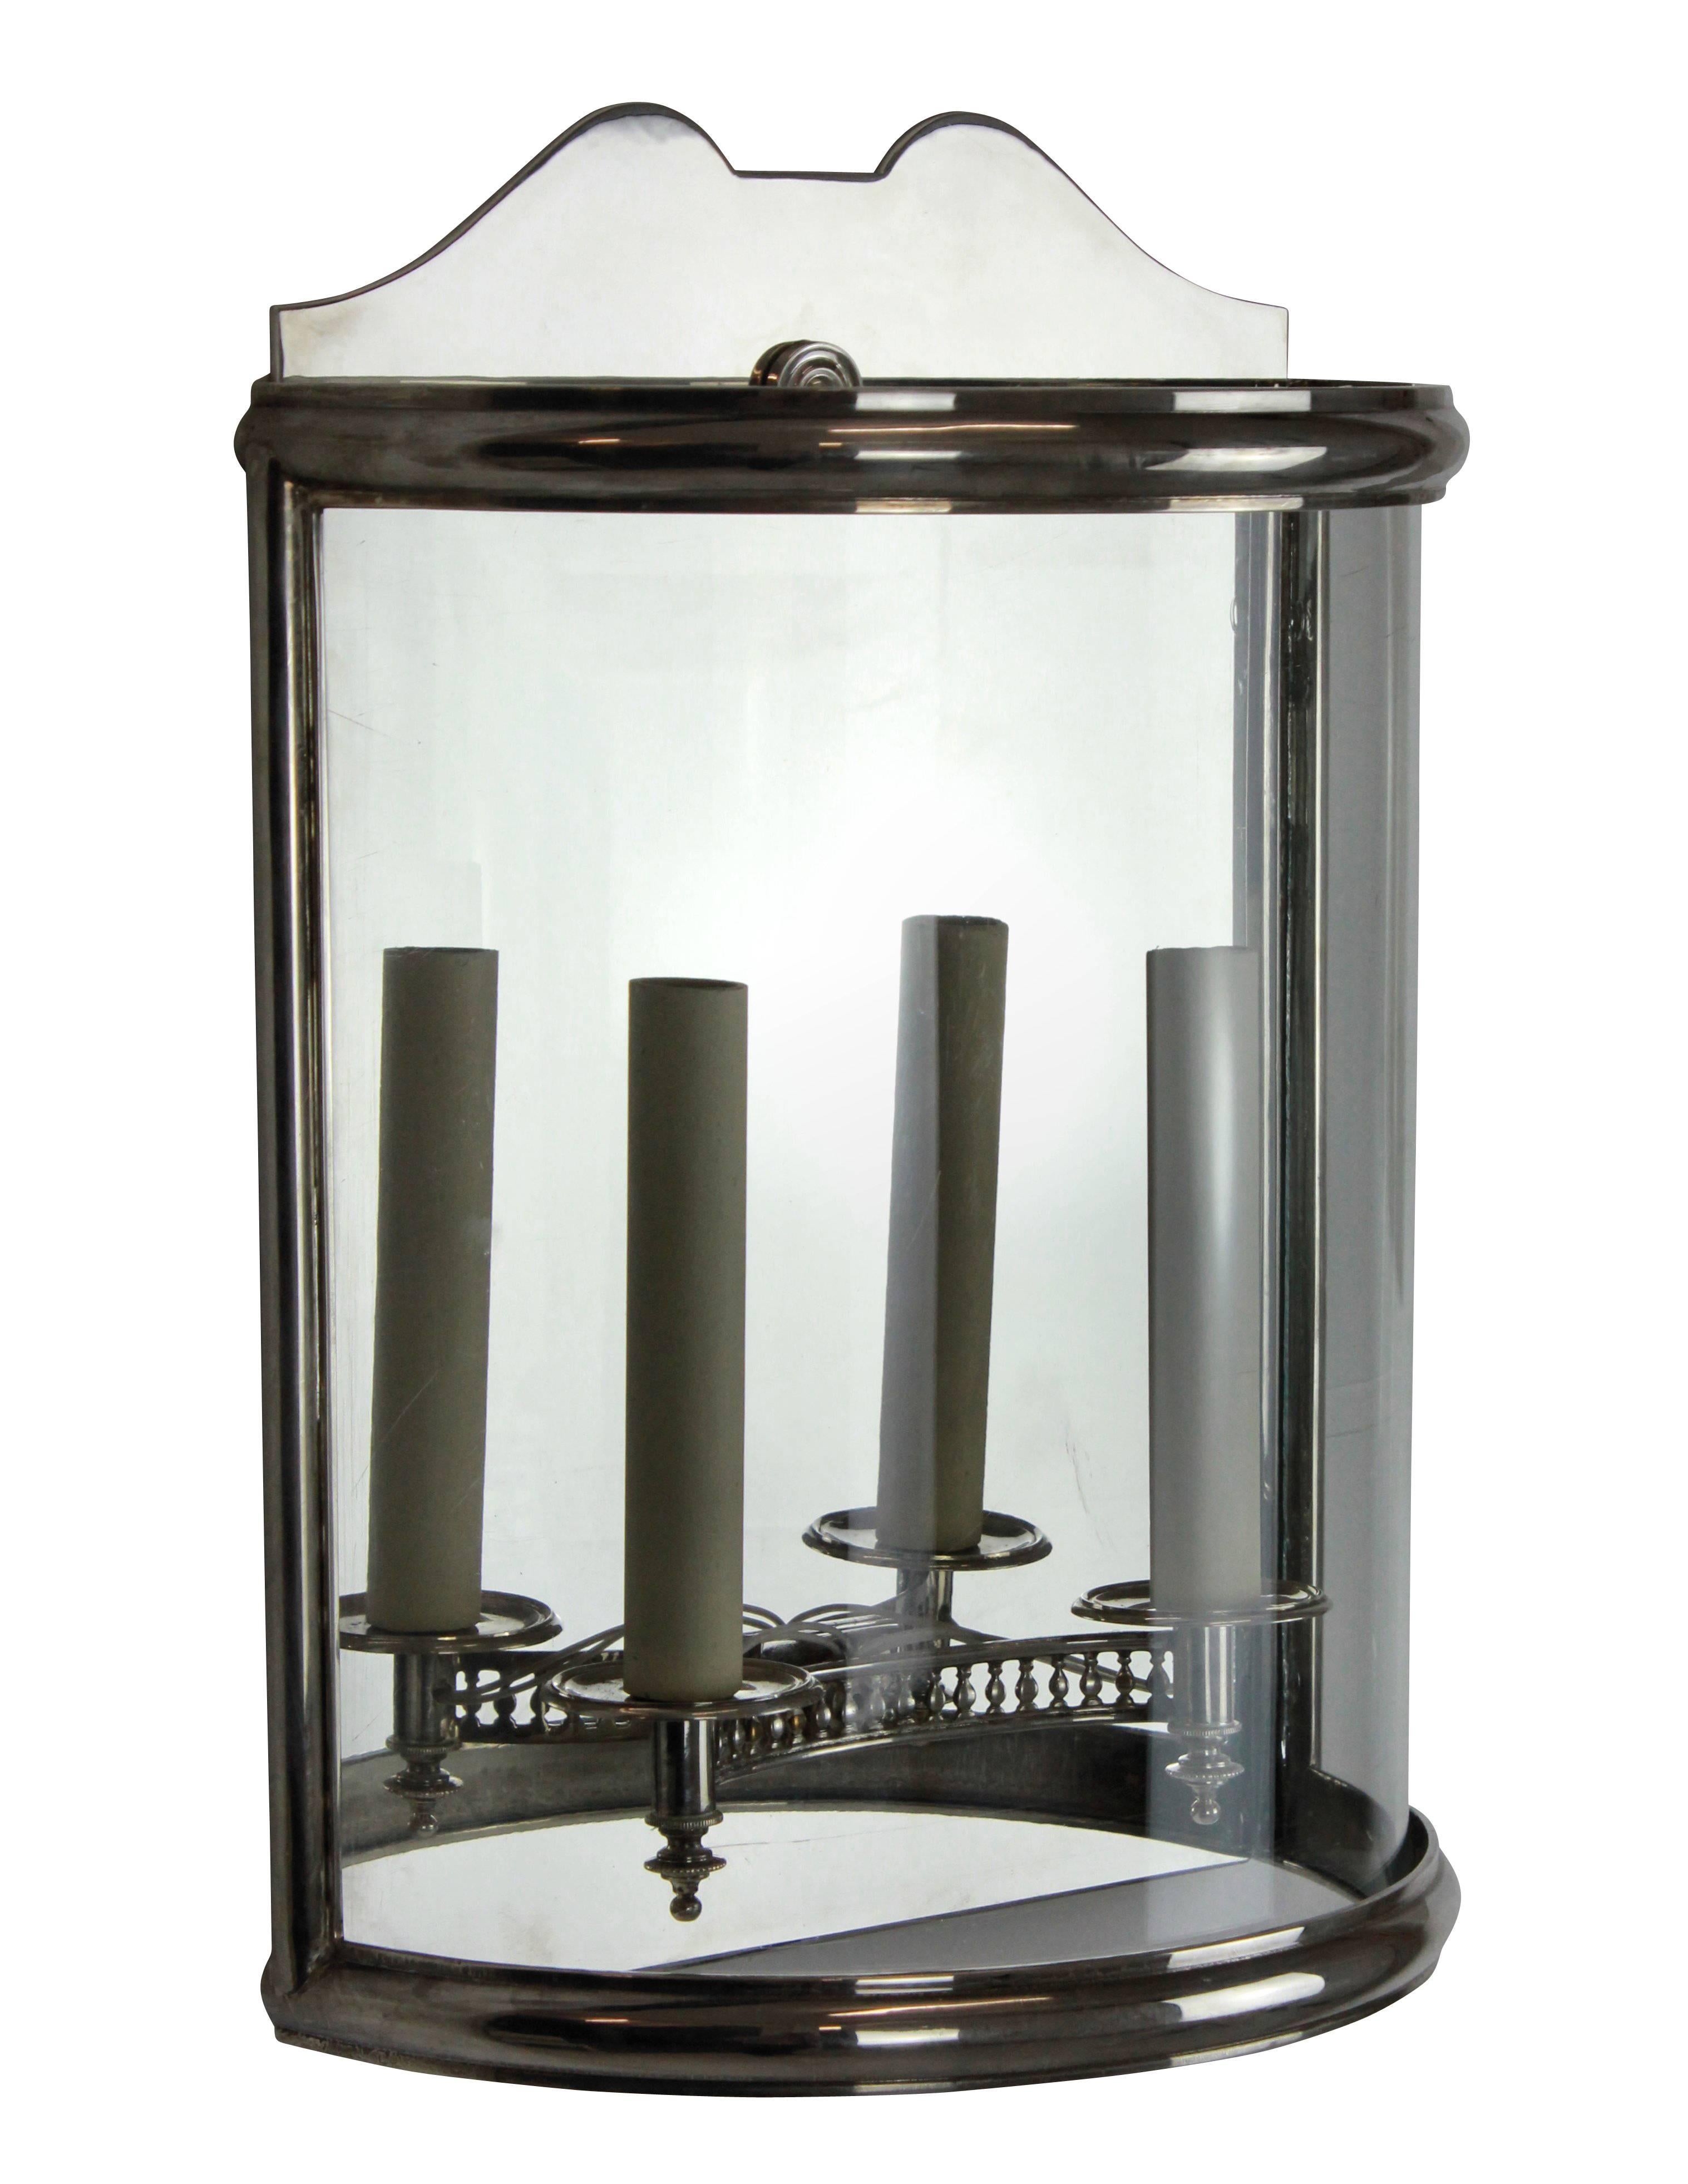 A pair of good quality English demilune wall lanterns in silver plated brass. Of simple Georgian design, with a single curved panel of glass.

 